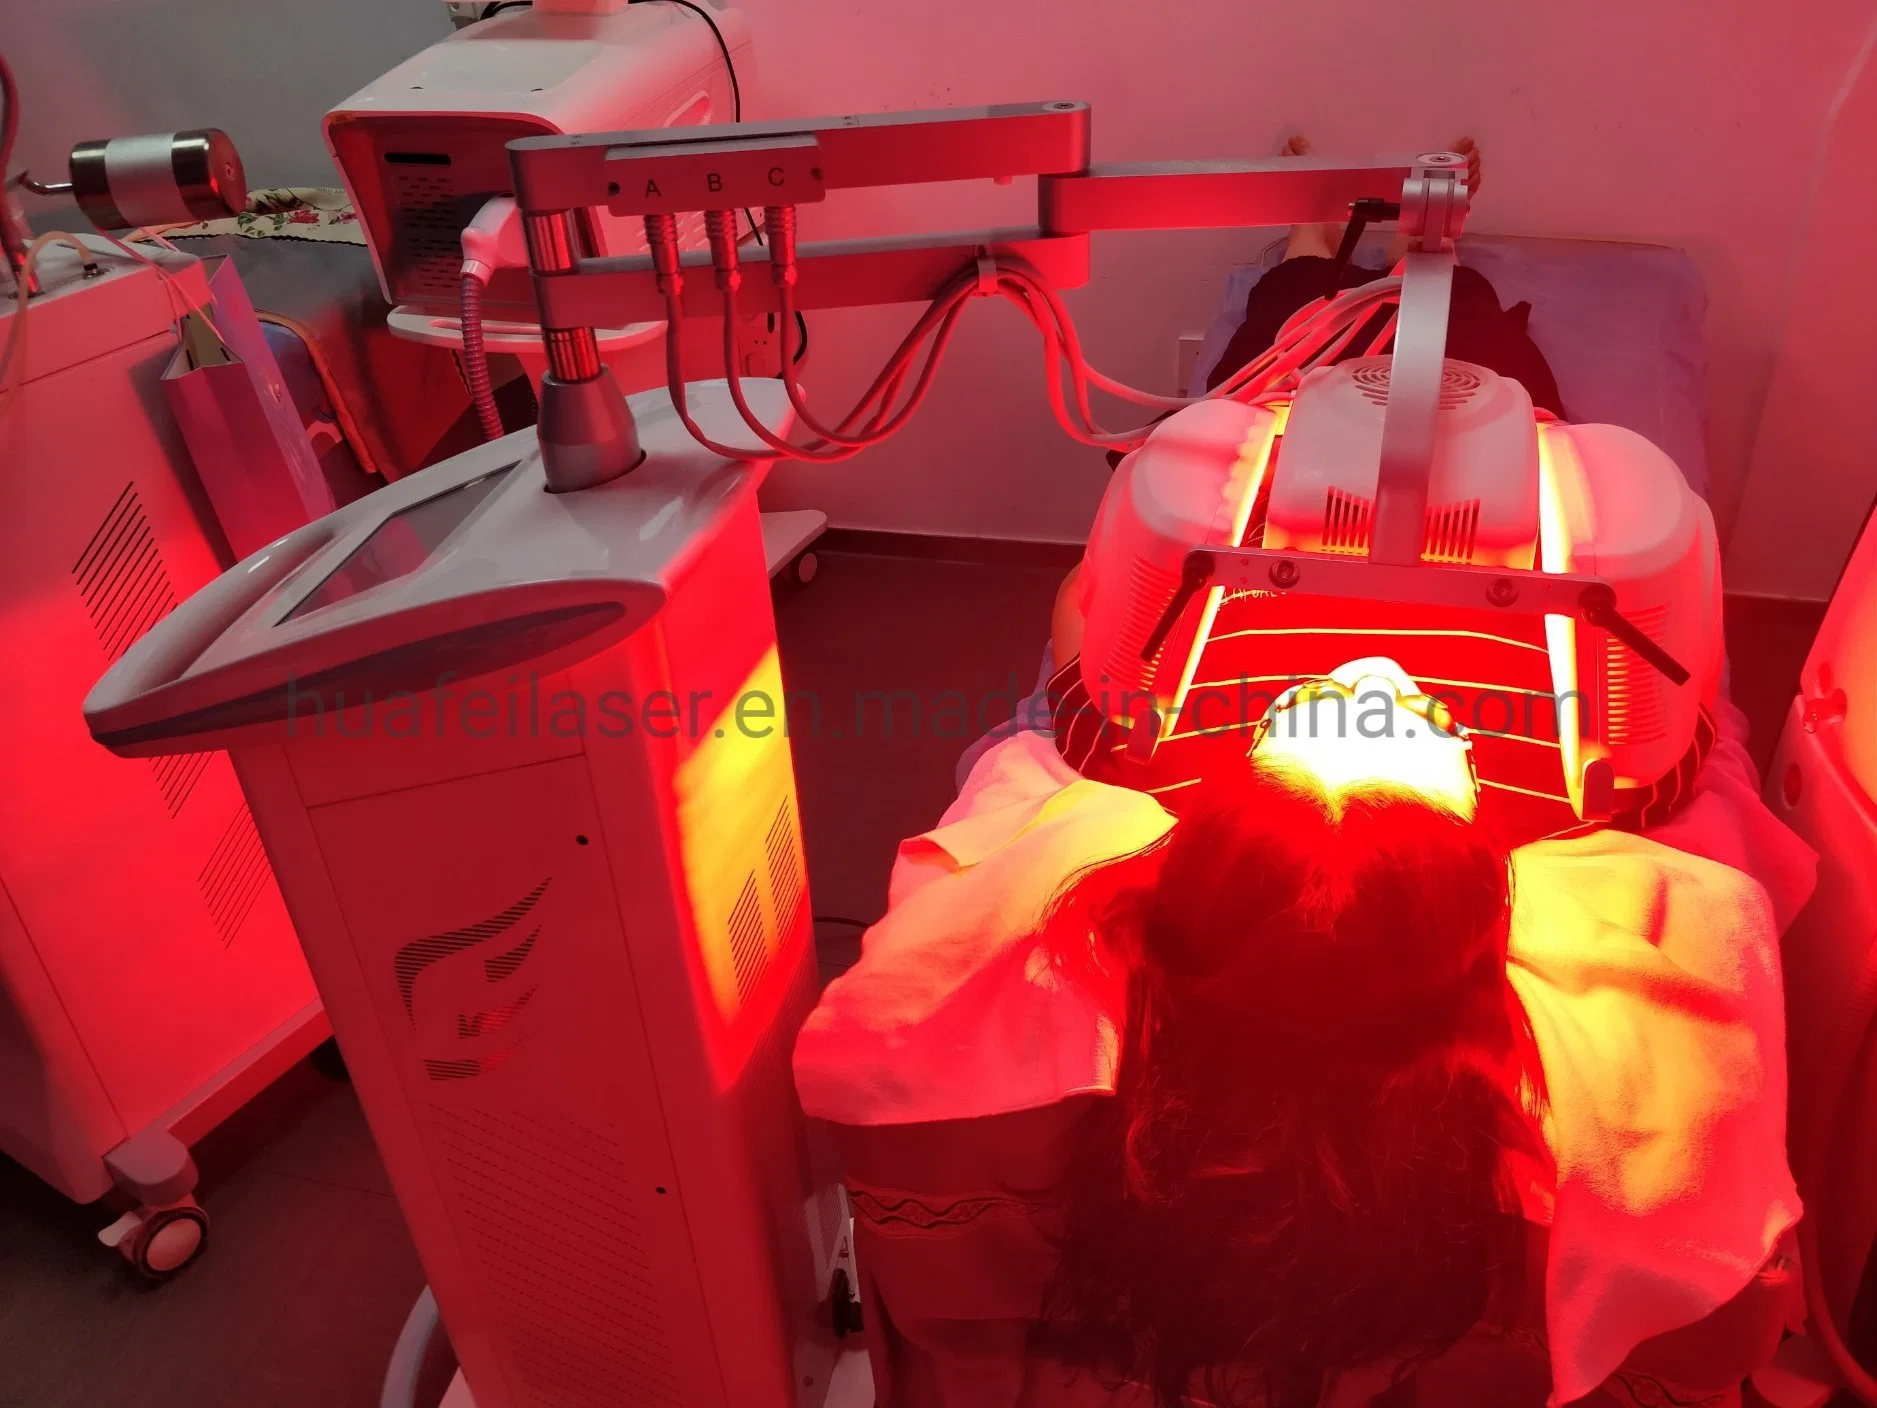 LED Light Phototherapy PDT Beauty Equipment Skin Rejuvenation Anti-Aging Phototherapy Skin Beauty